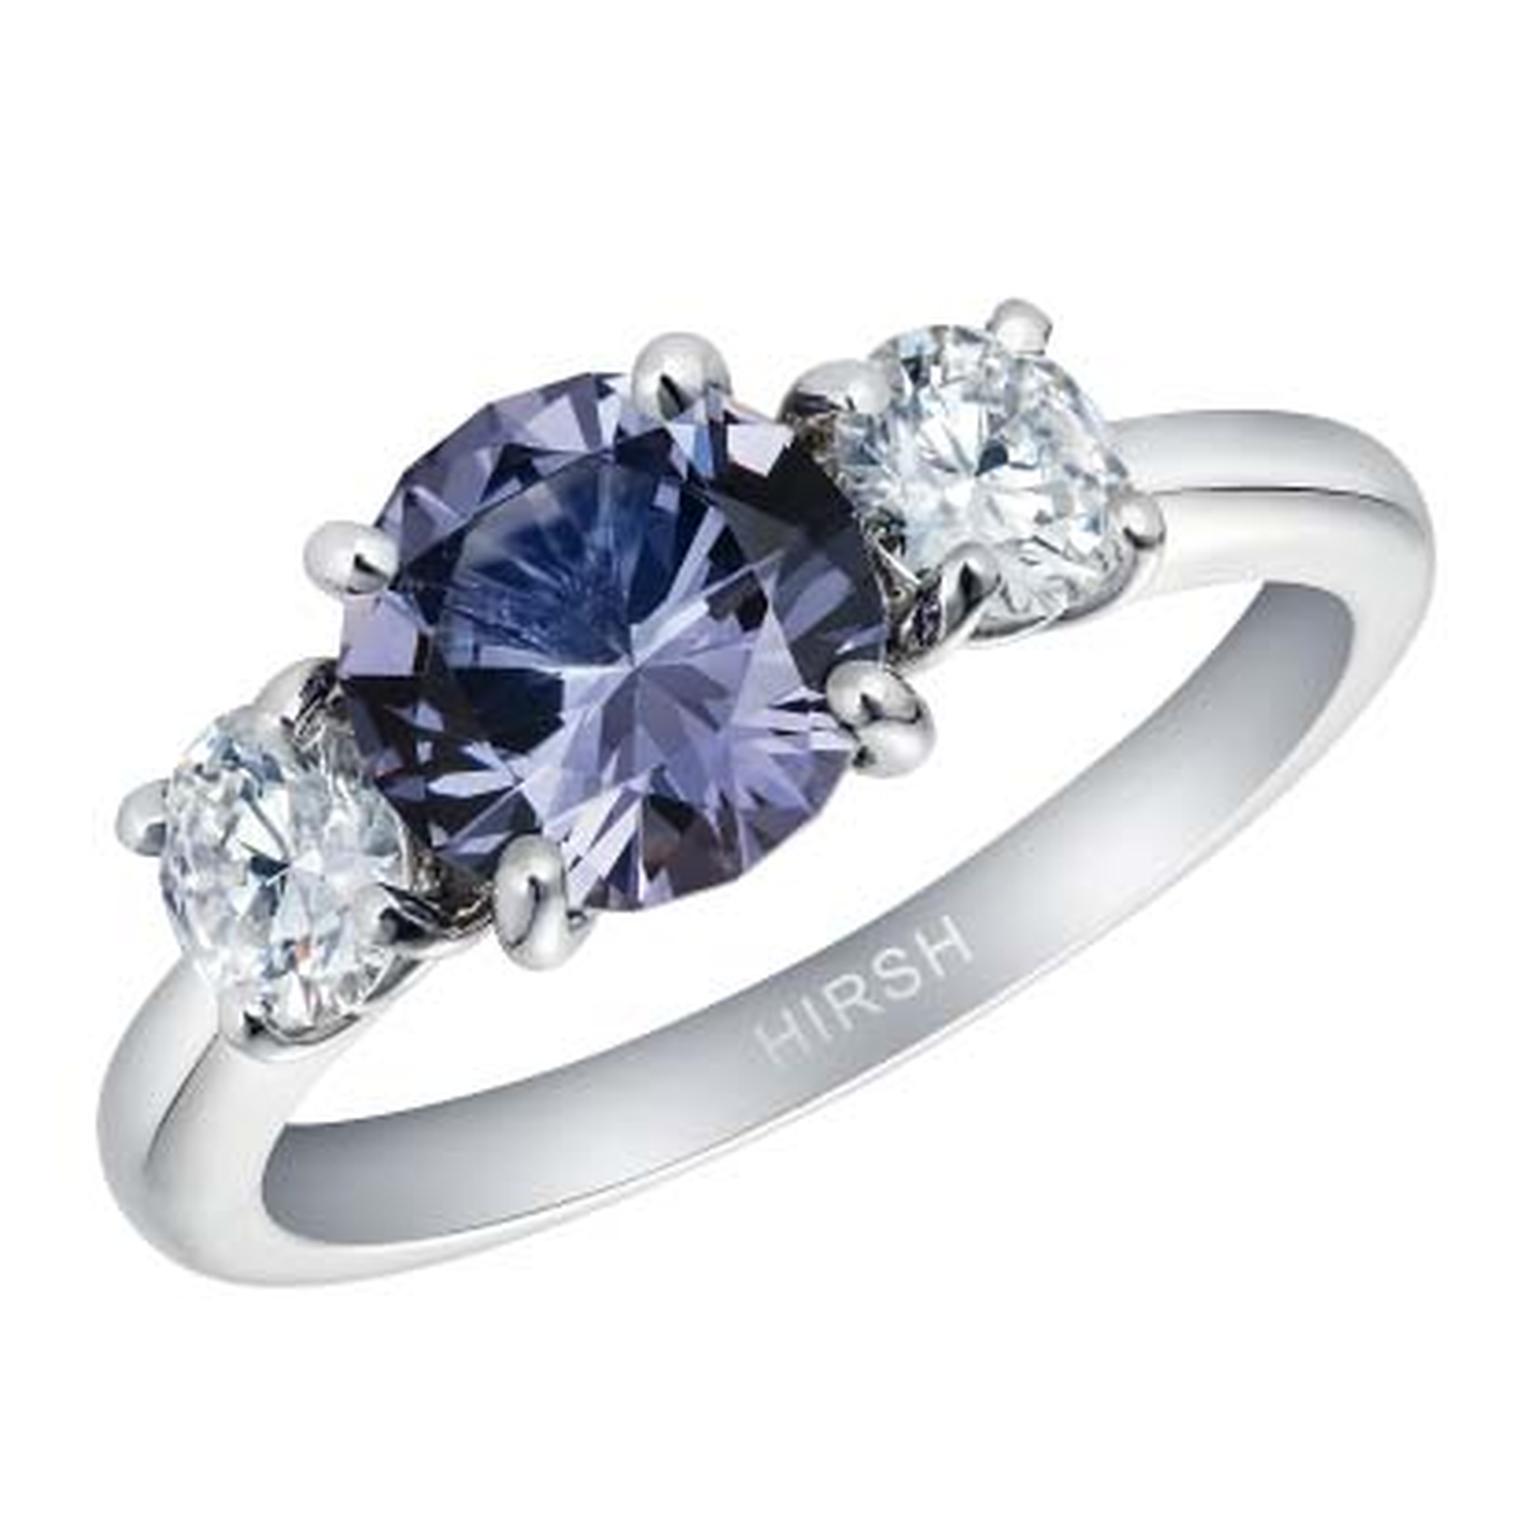 Top five alternative engagement ring trends for 2020